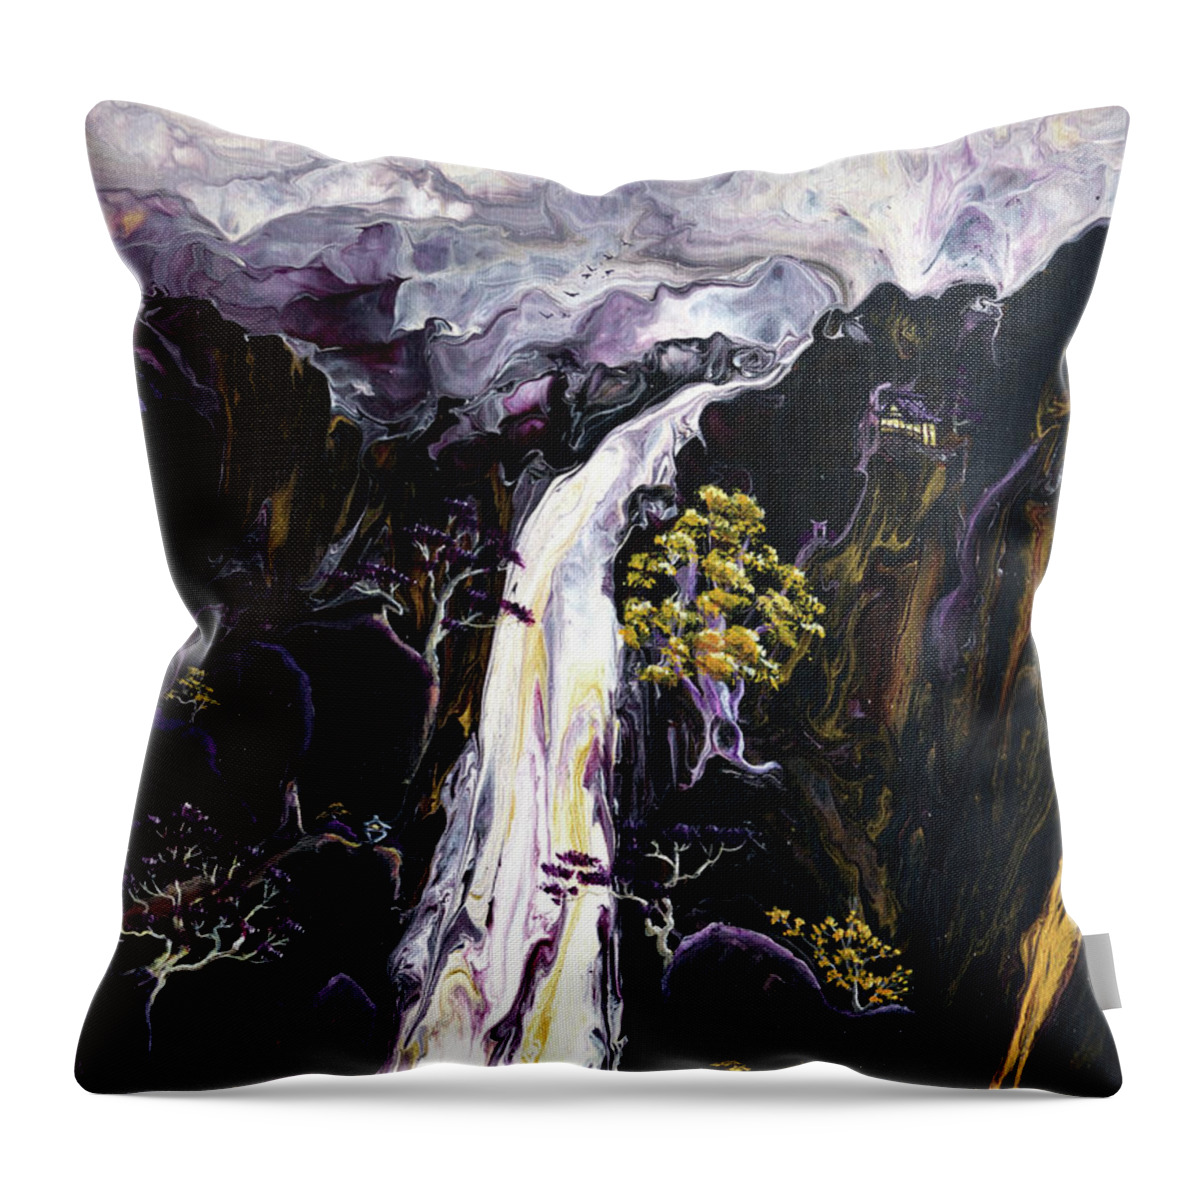 Waterfall Throw Pillow featuring the painting Contemplating the Journey by Laura Iverson